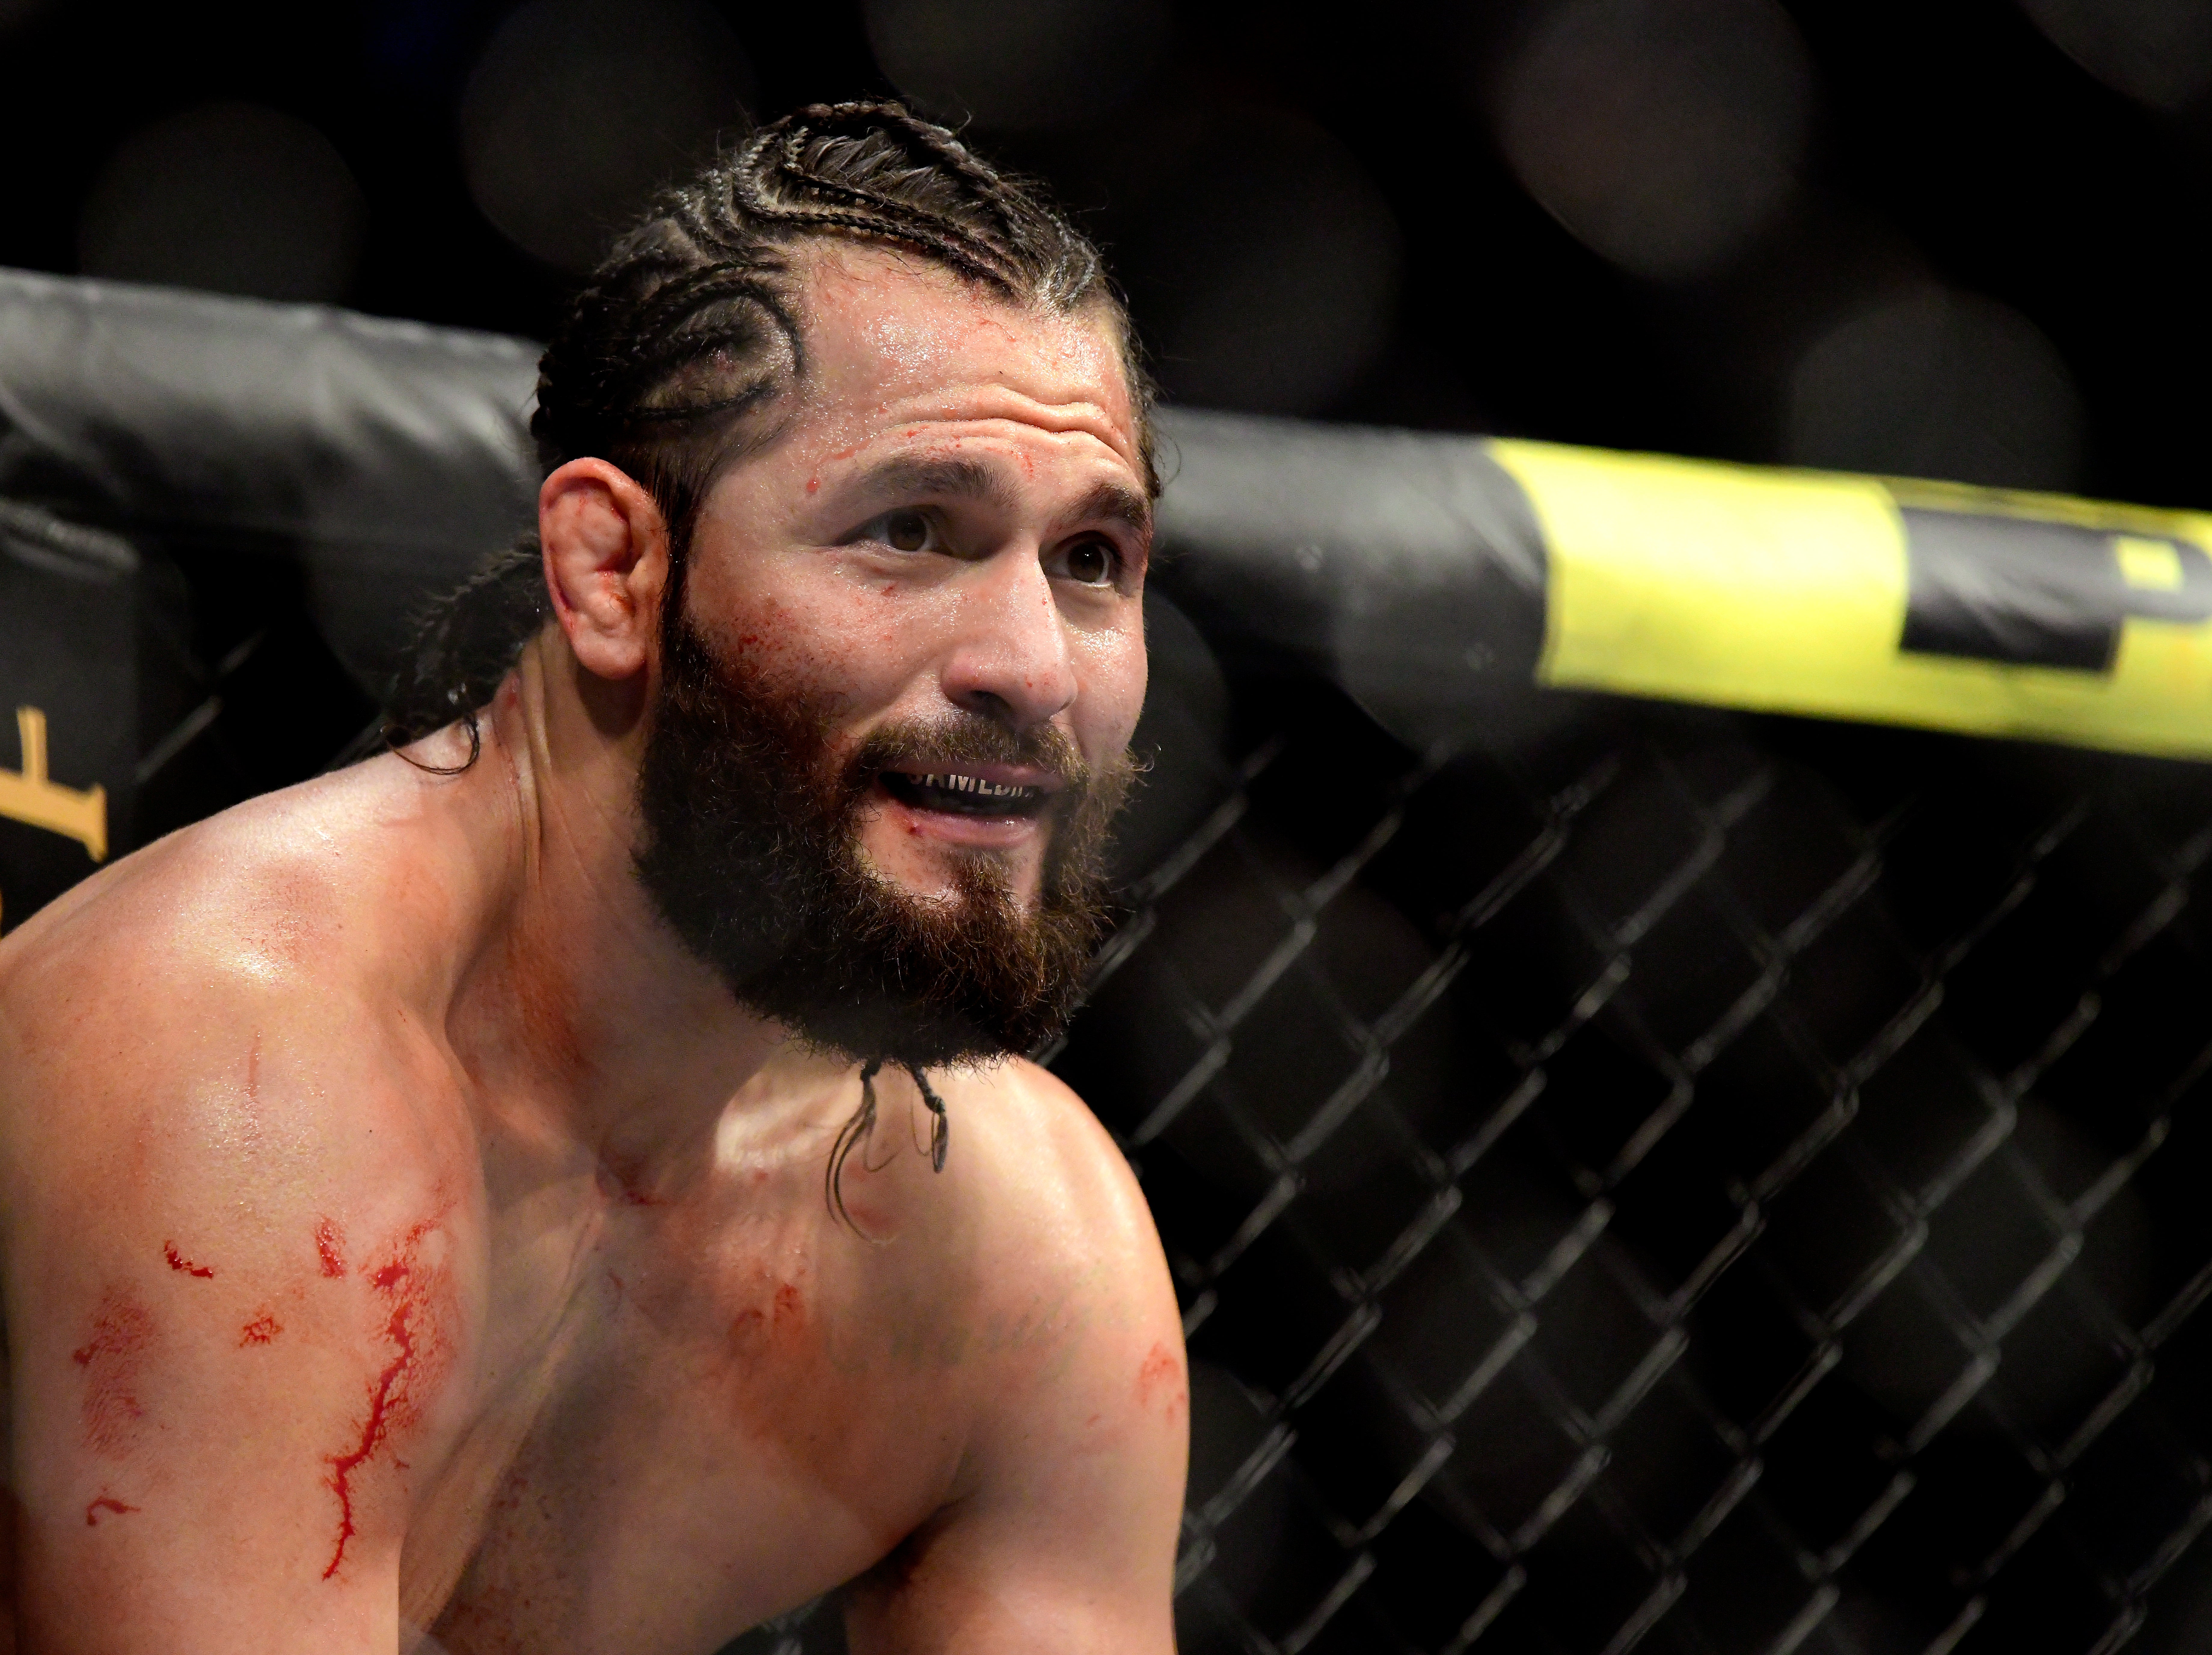 Jorge Masvidal will headline UFC 261 in front of 15,000 fans in his home state of Florida this Saturday